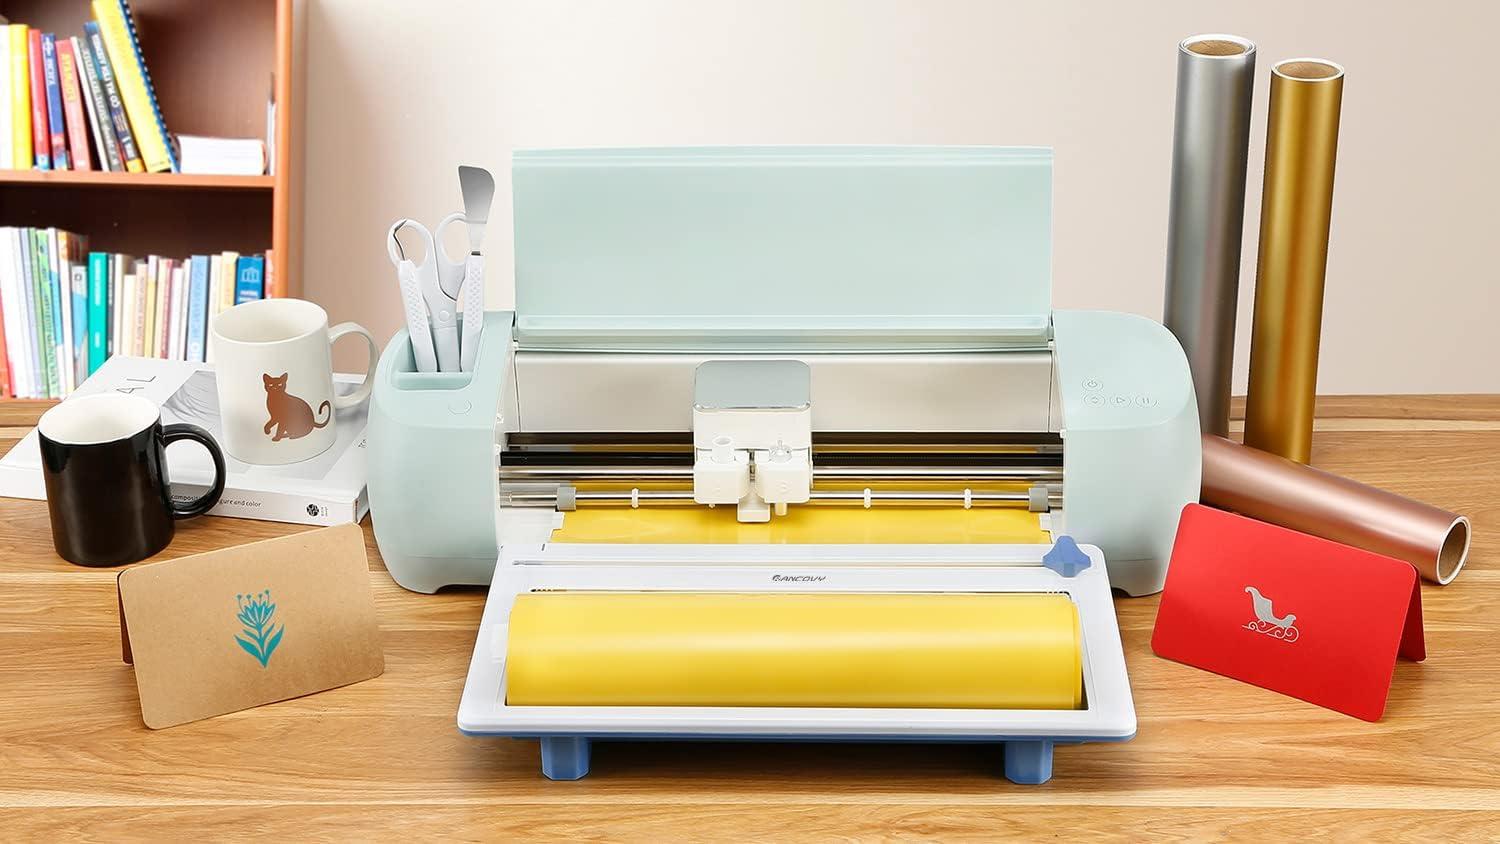  Cricut Explore 3 and Roll Holder Bundle  Easy Use of Matless  Cricut Smart Materials with Built in Trimmer